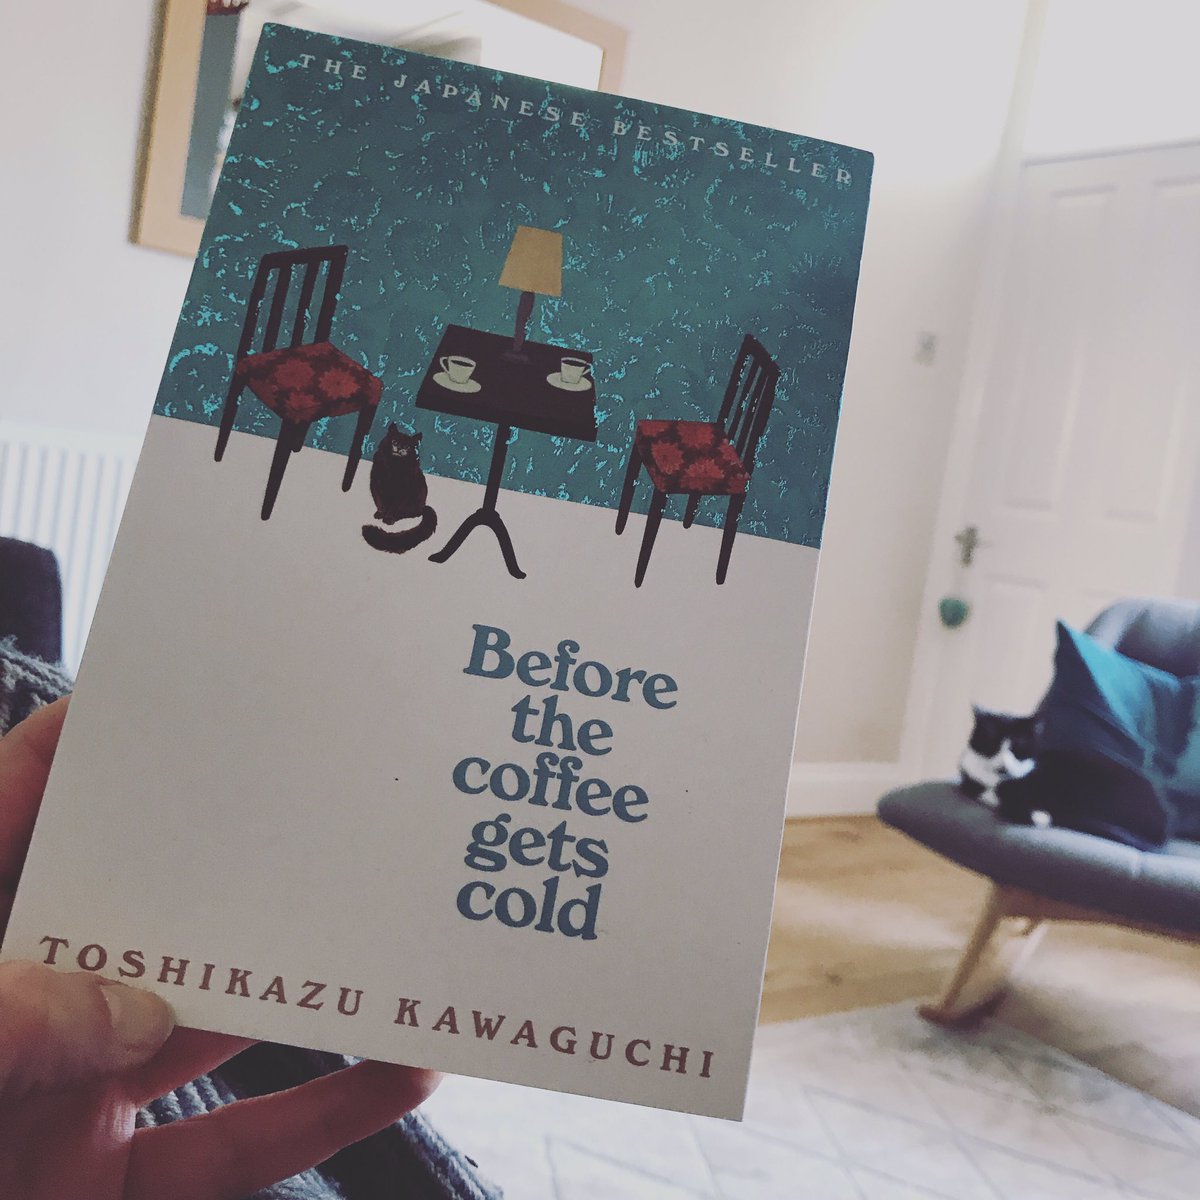 Book 11: Before the coffee gets cold - Toshikazu Kawaguchi Fell in love with the blurb, less so the execution. A nice pleasant plinky-plonky read for a Sunday afternoon but not as good as I was hoping. Felt like it may have been a poor translation.